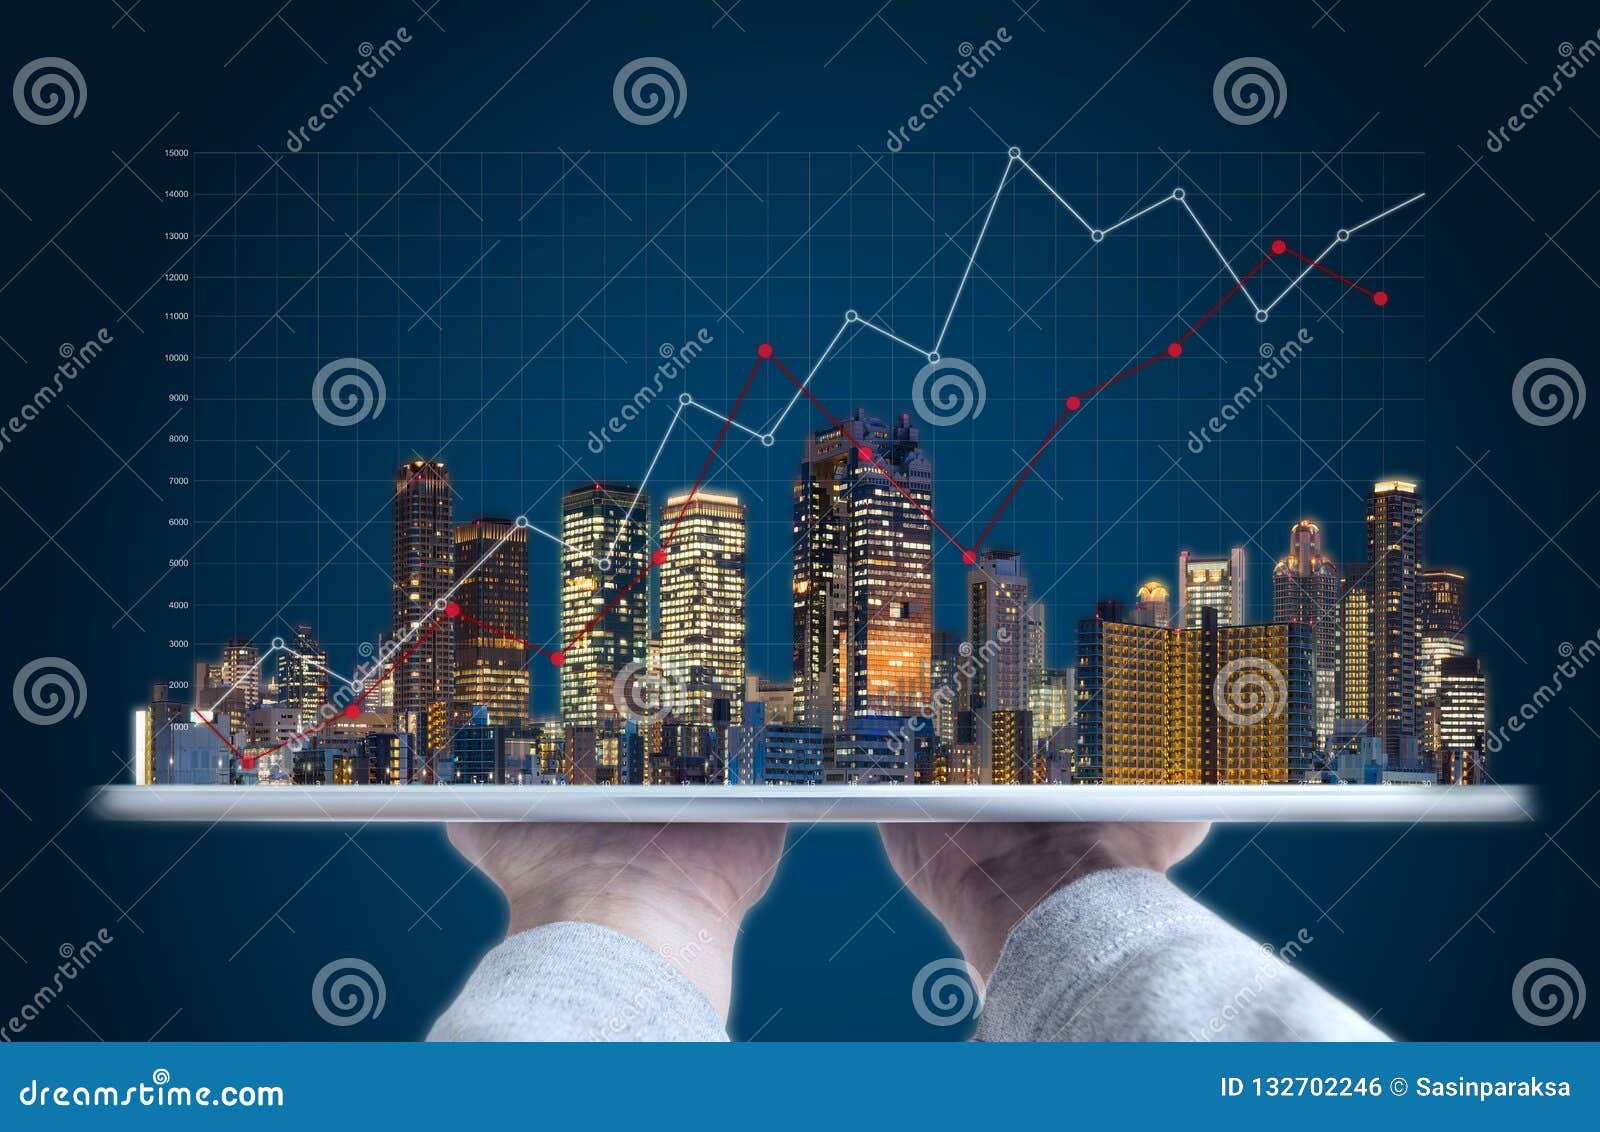 real estate business investment and building technology. hand holding digital tablet with buildings hologram and raising graph